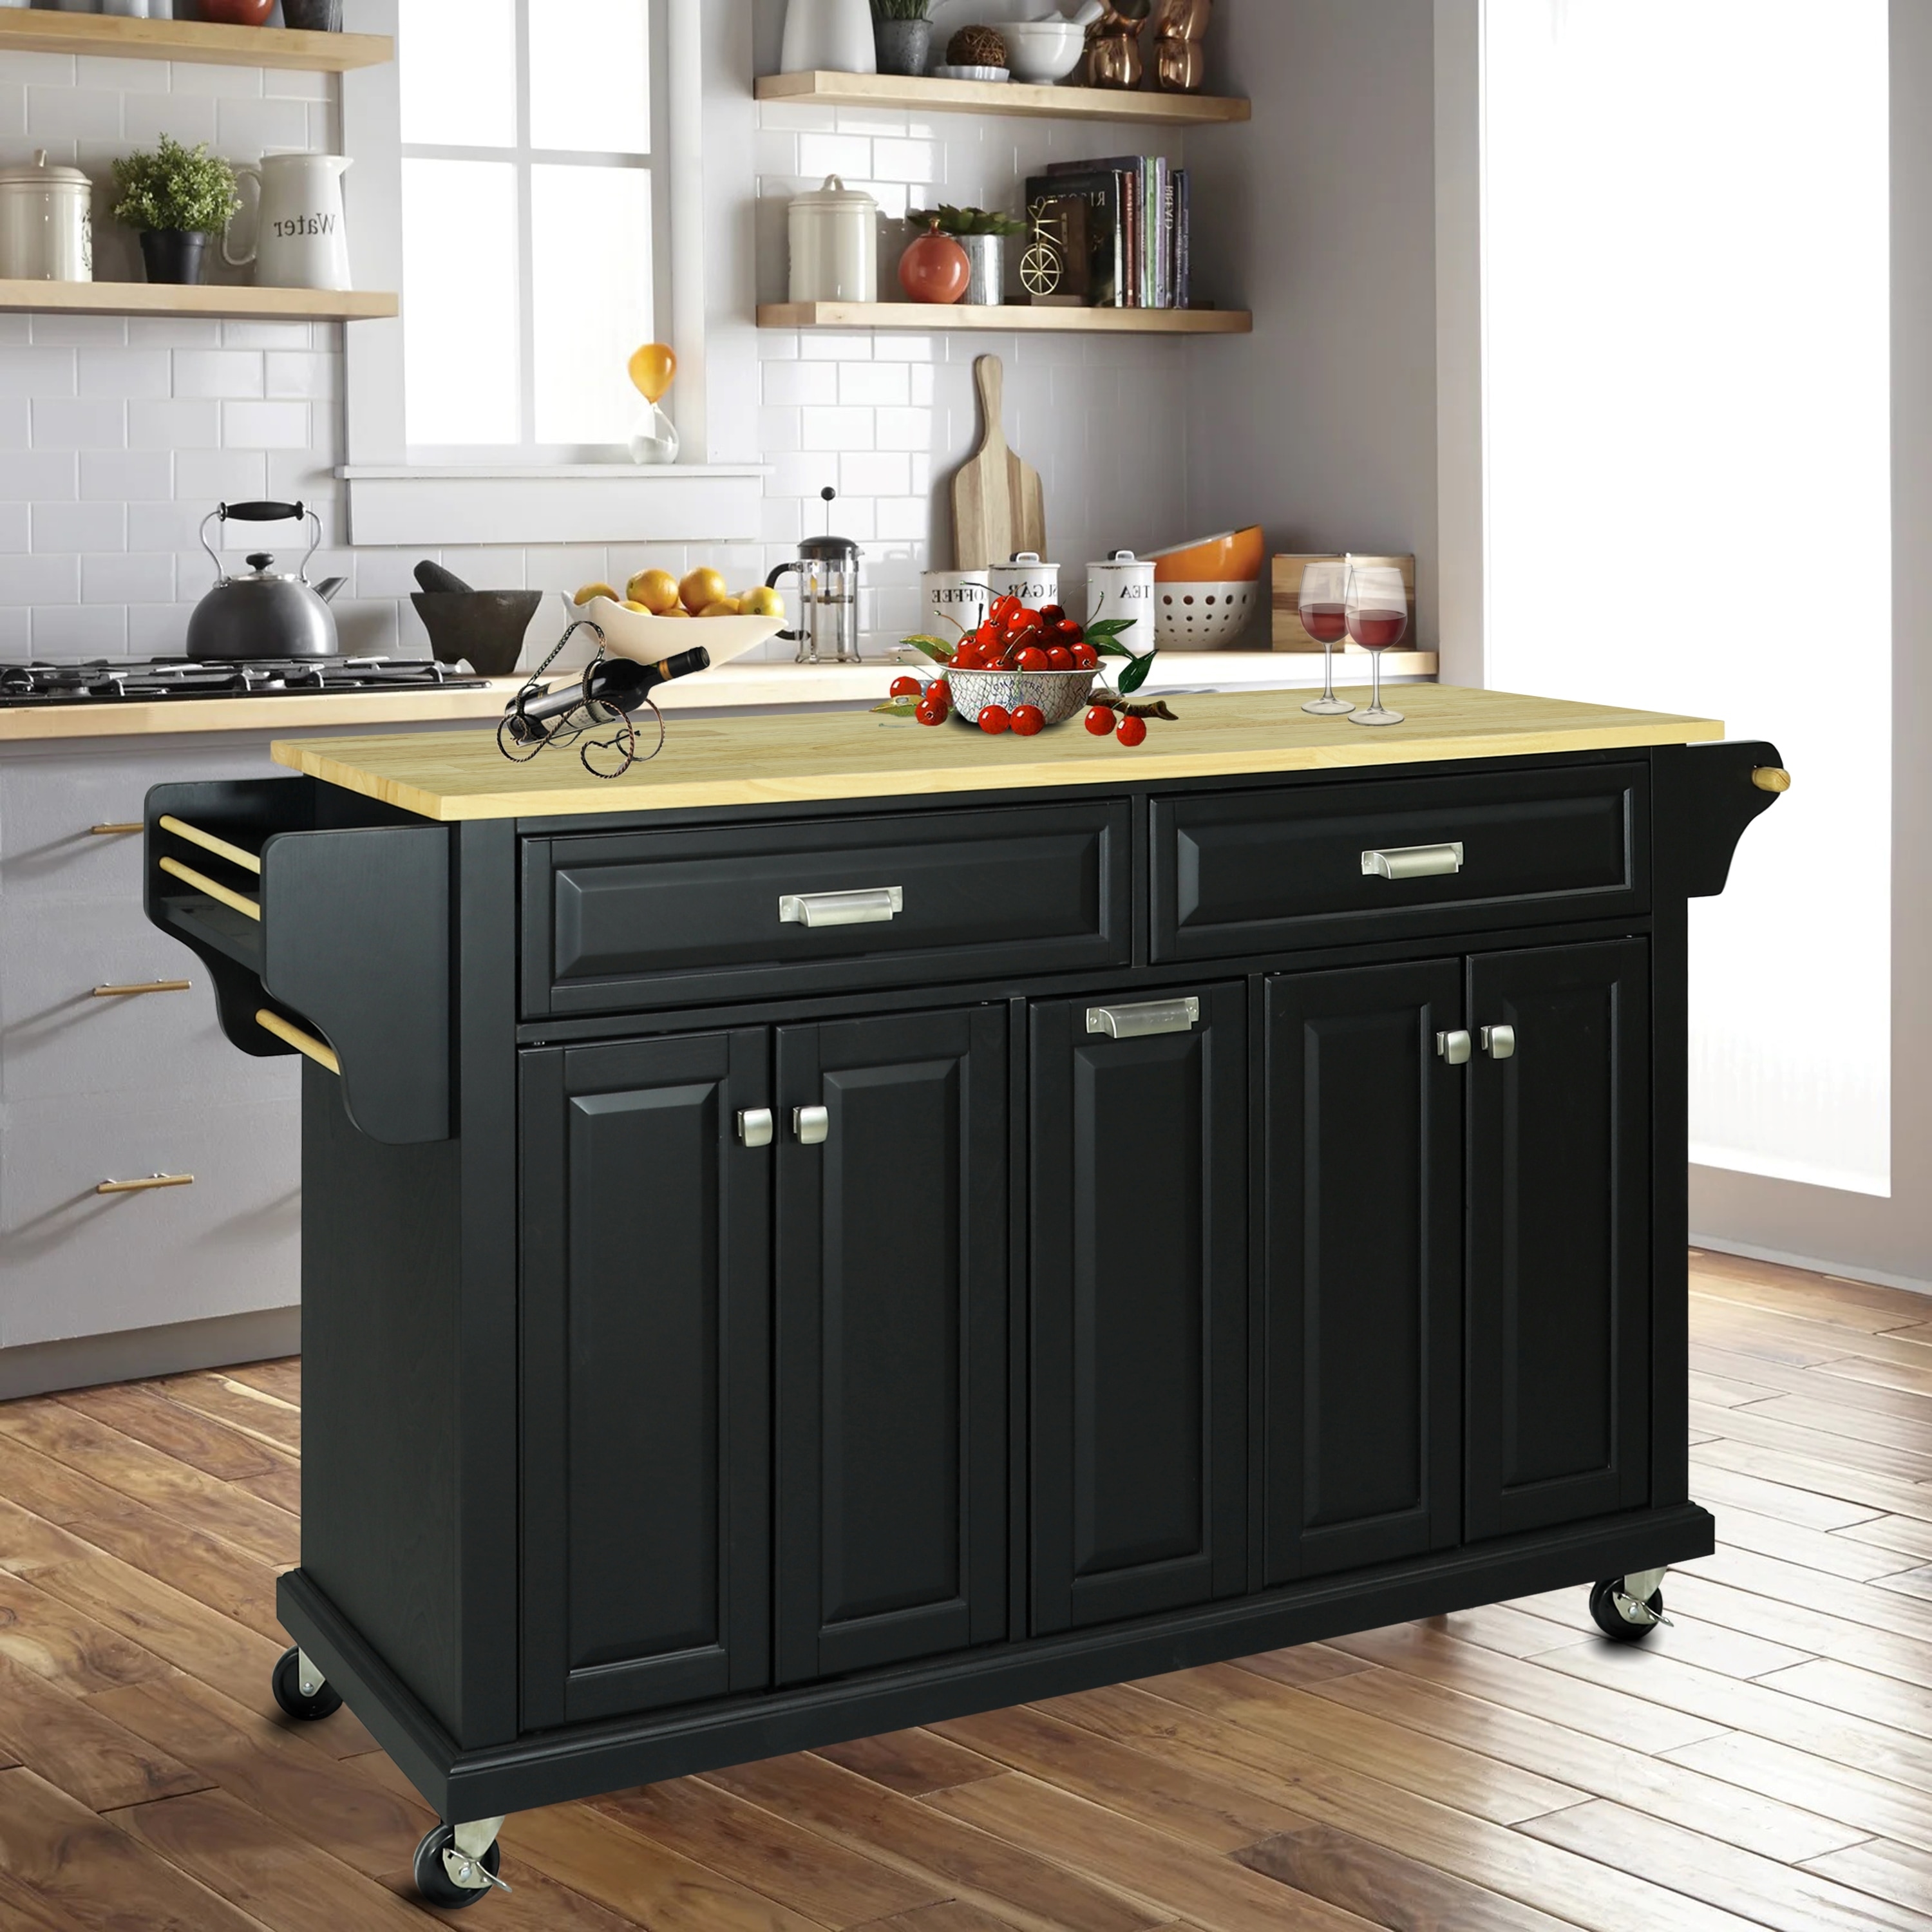 Black Kitchen Island on Wheels Kitchen Cart with Cabinet 3-Layer Shelves Wood Countertop Mobile Storage Islands